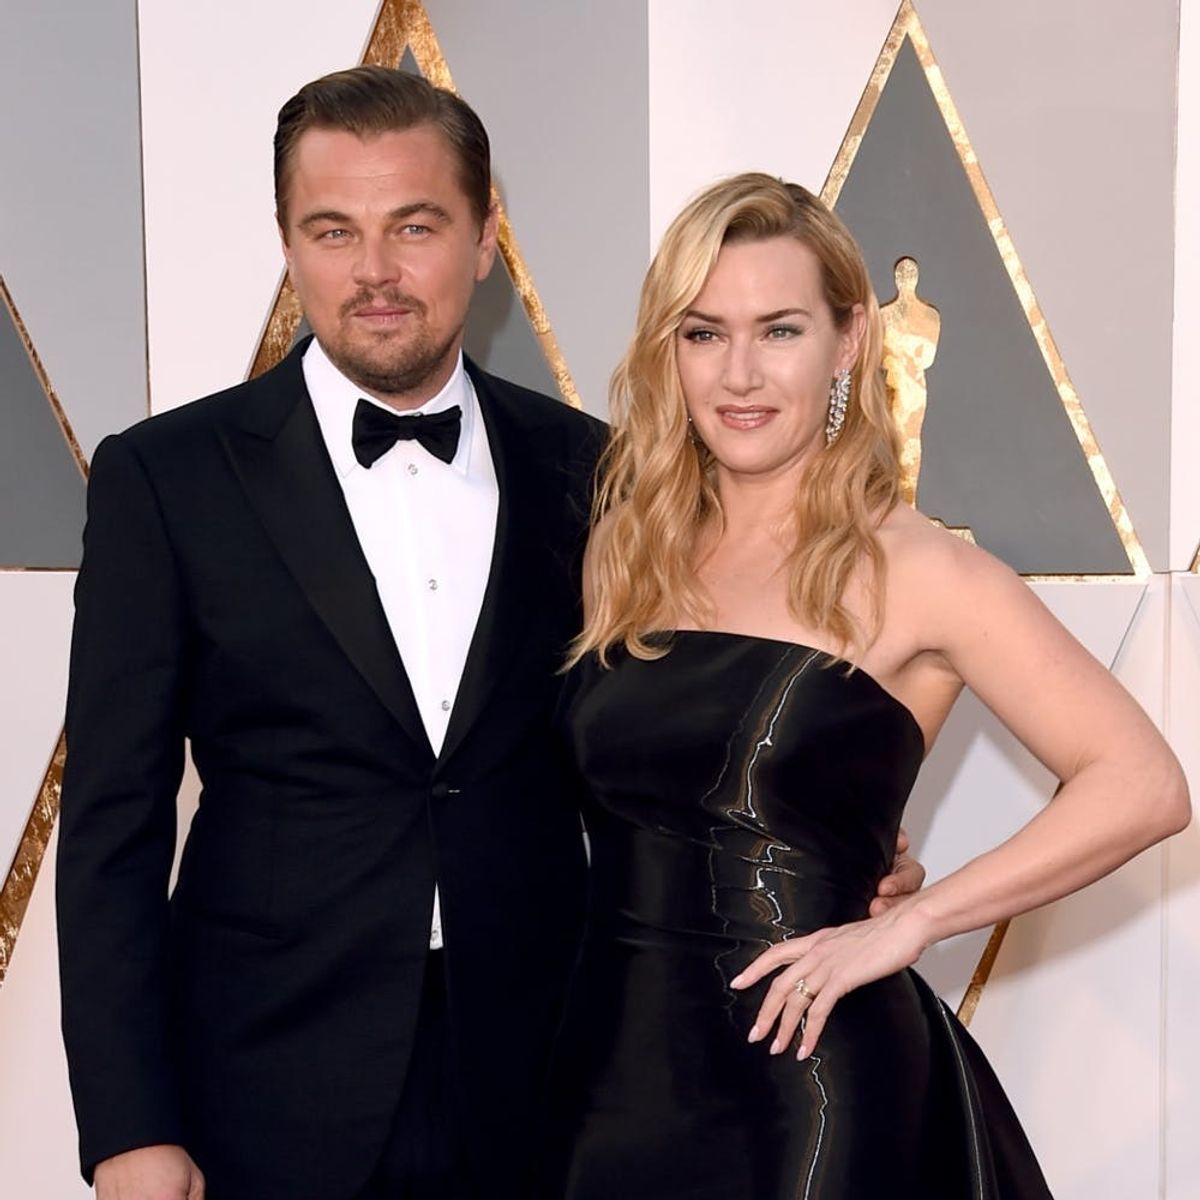 Kate Winslet Has Something Disappointing to Say About Working With Leonardo DiCaprio